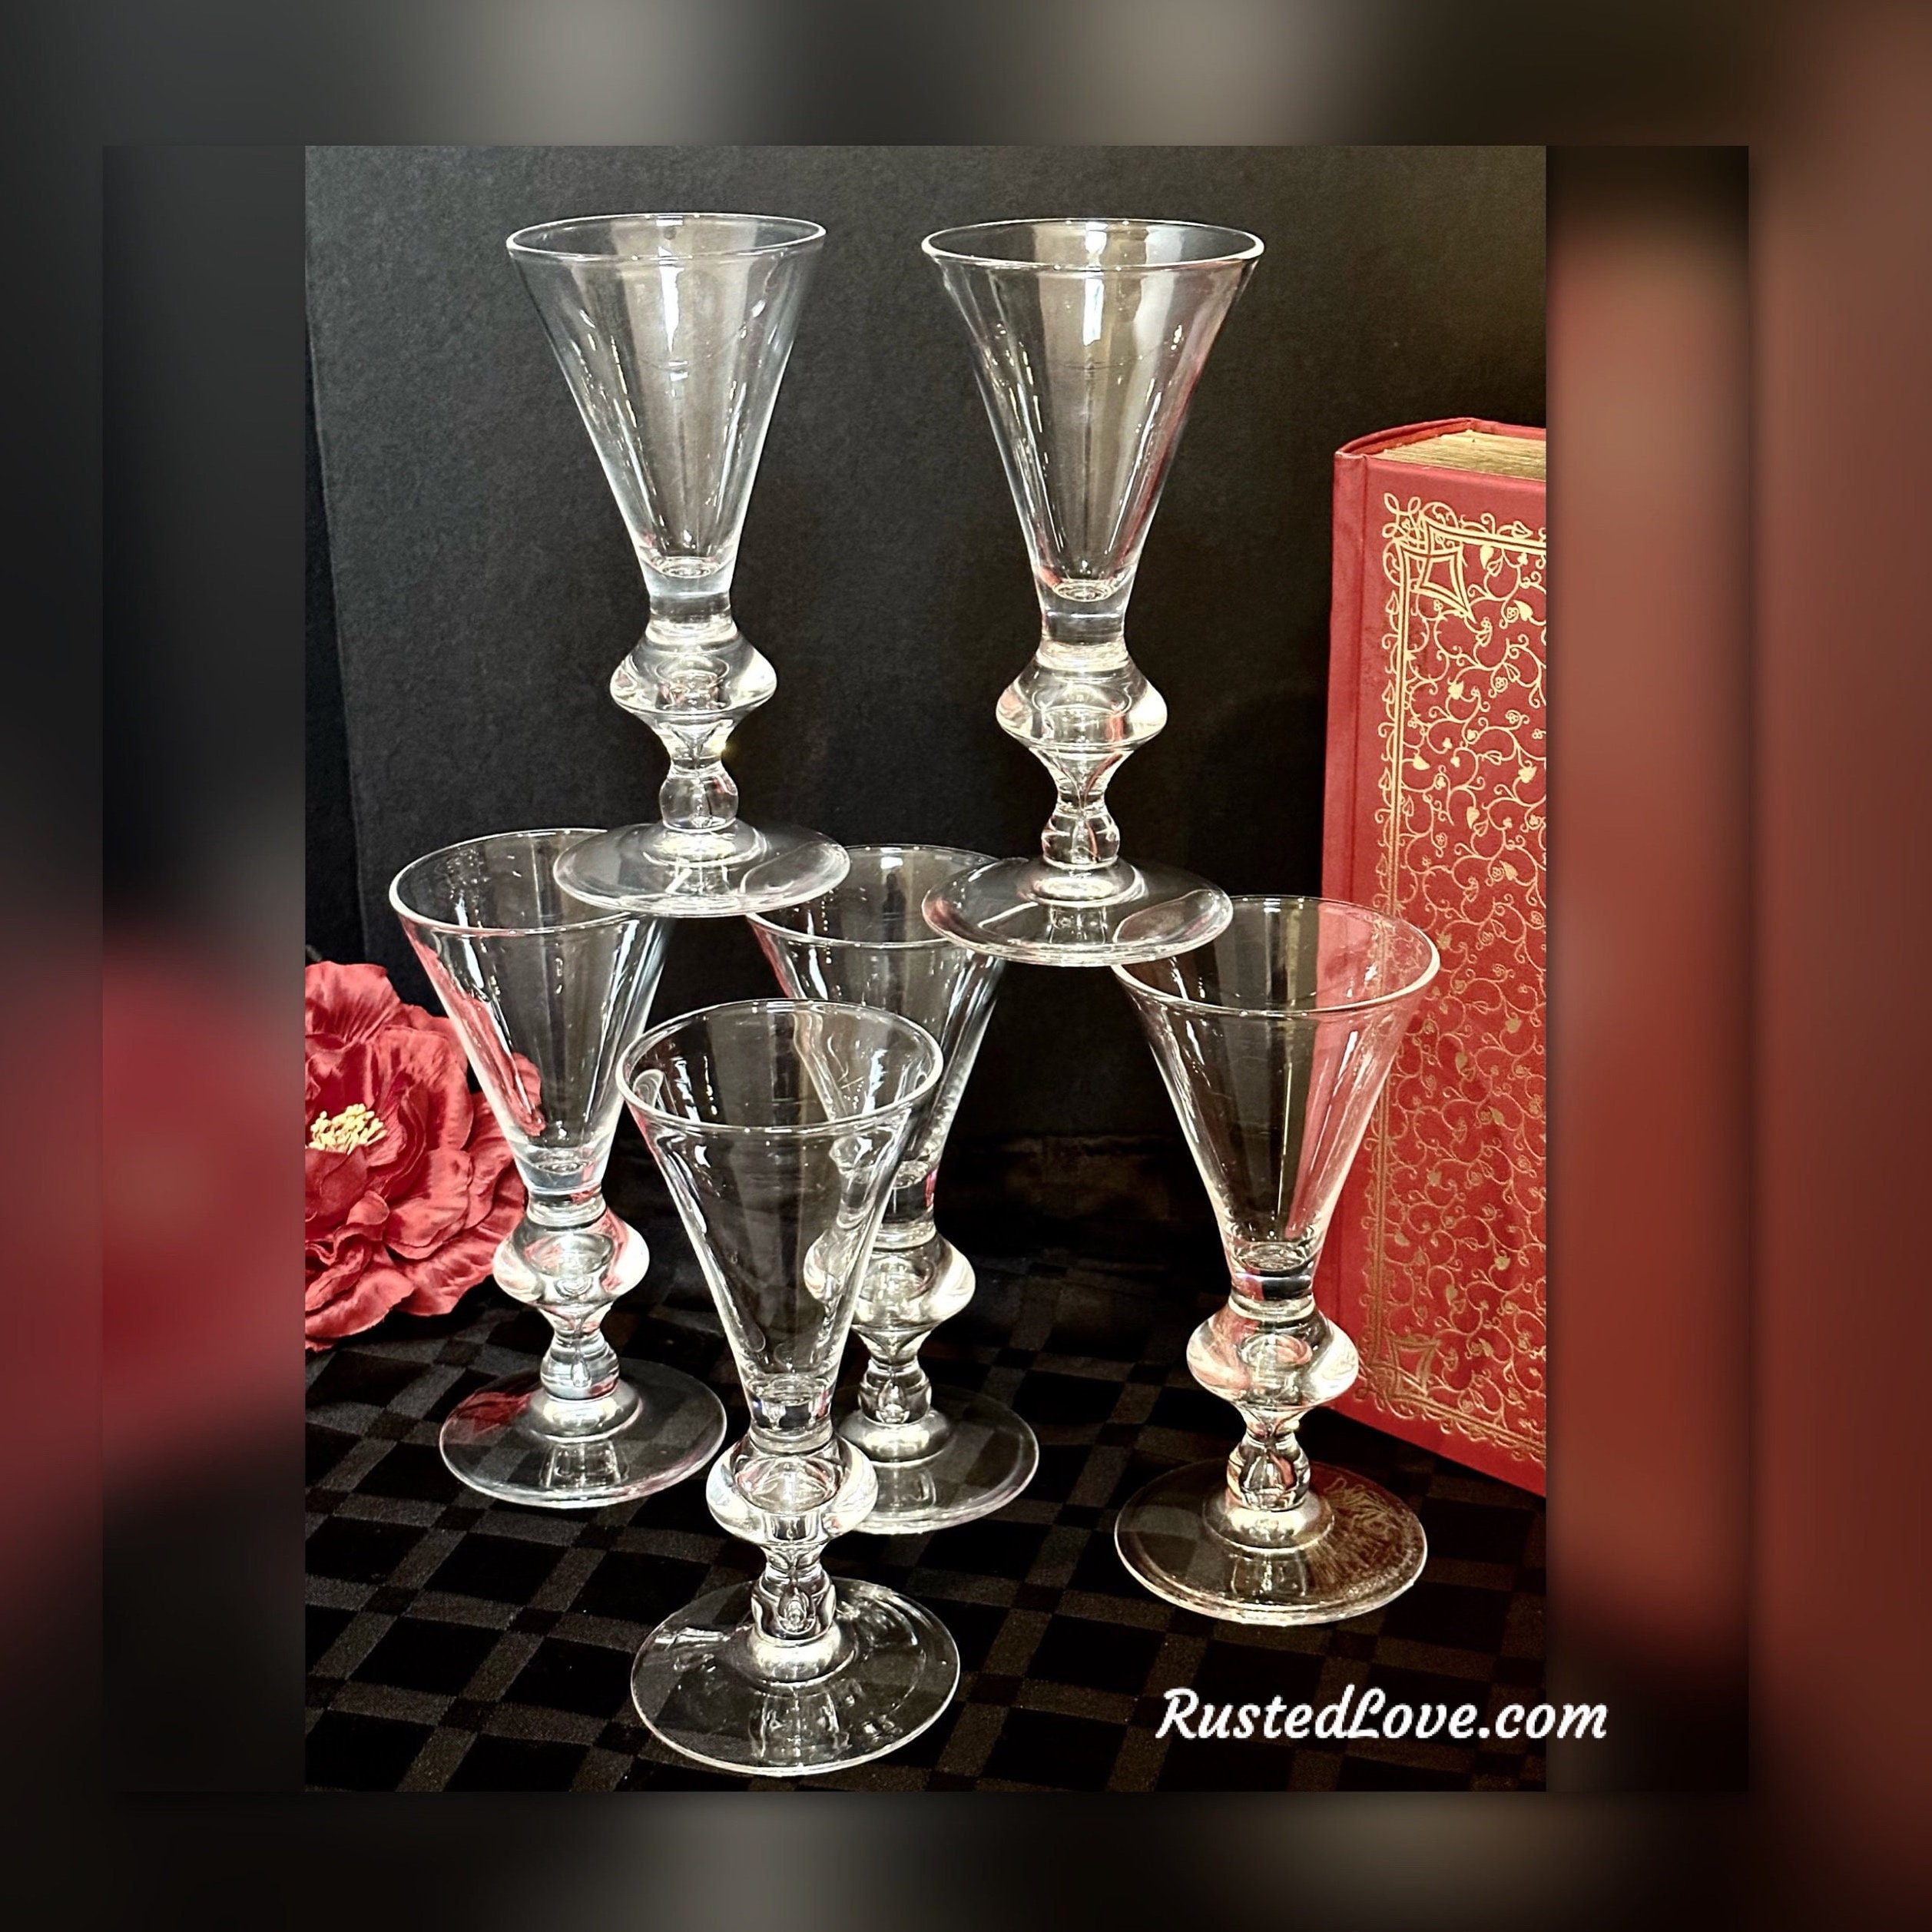 Set of Four Hand-Painted 'Bubble' Glasses Made-to-Order in Los Angeles –  Venable Moore